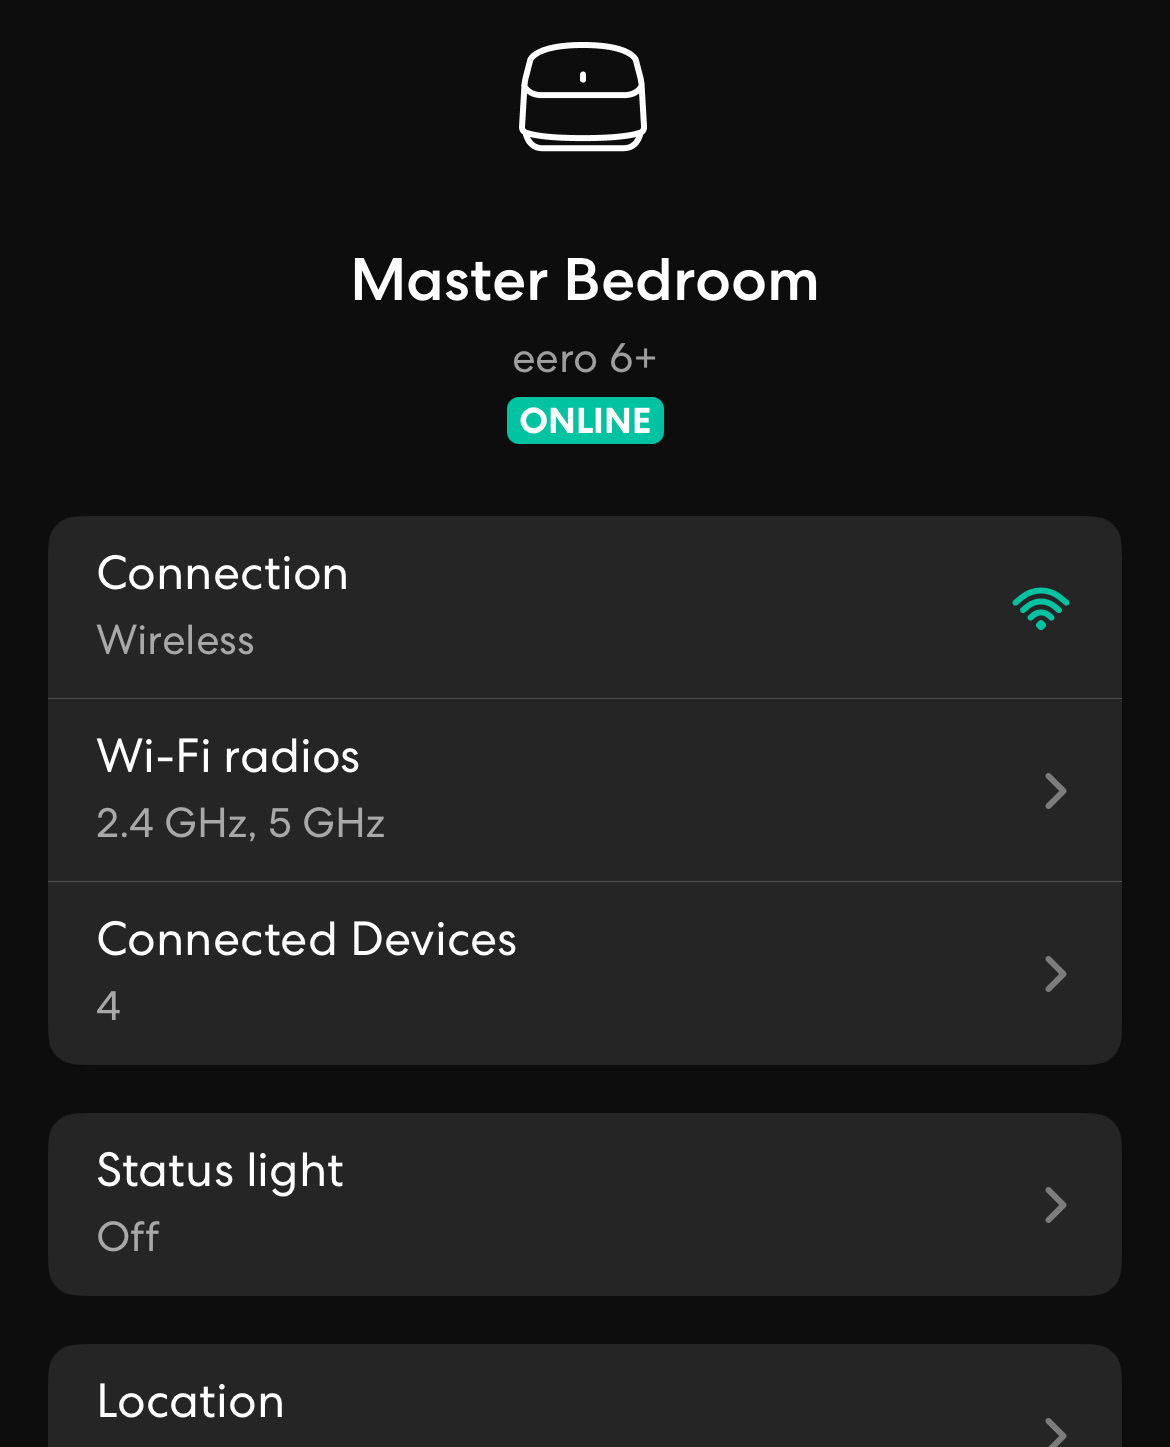 Eero iOS app showing a setting for Status Light that is currently “off”. It also shows connectd devices as “4” 